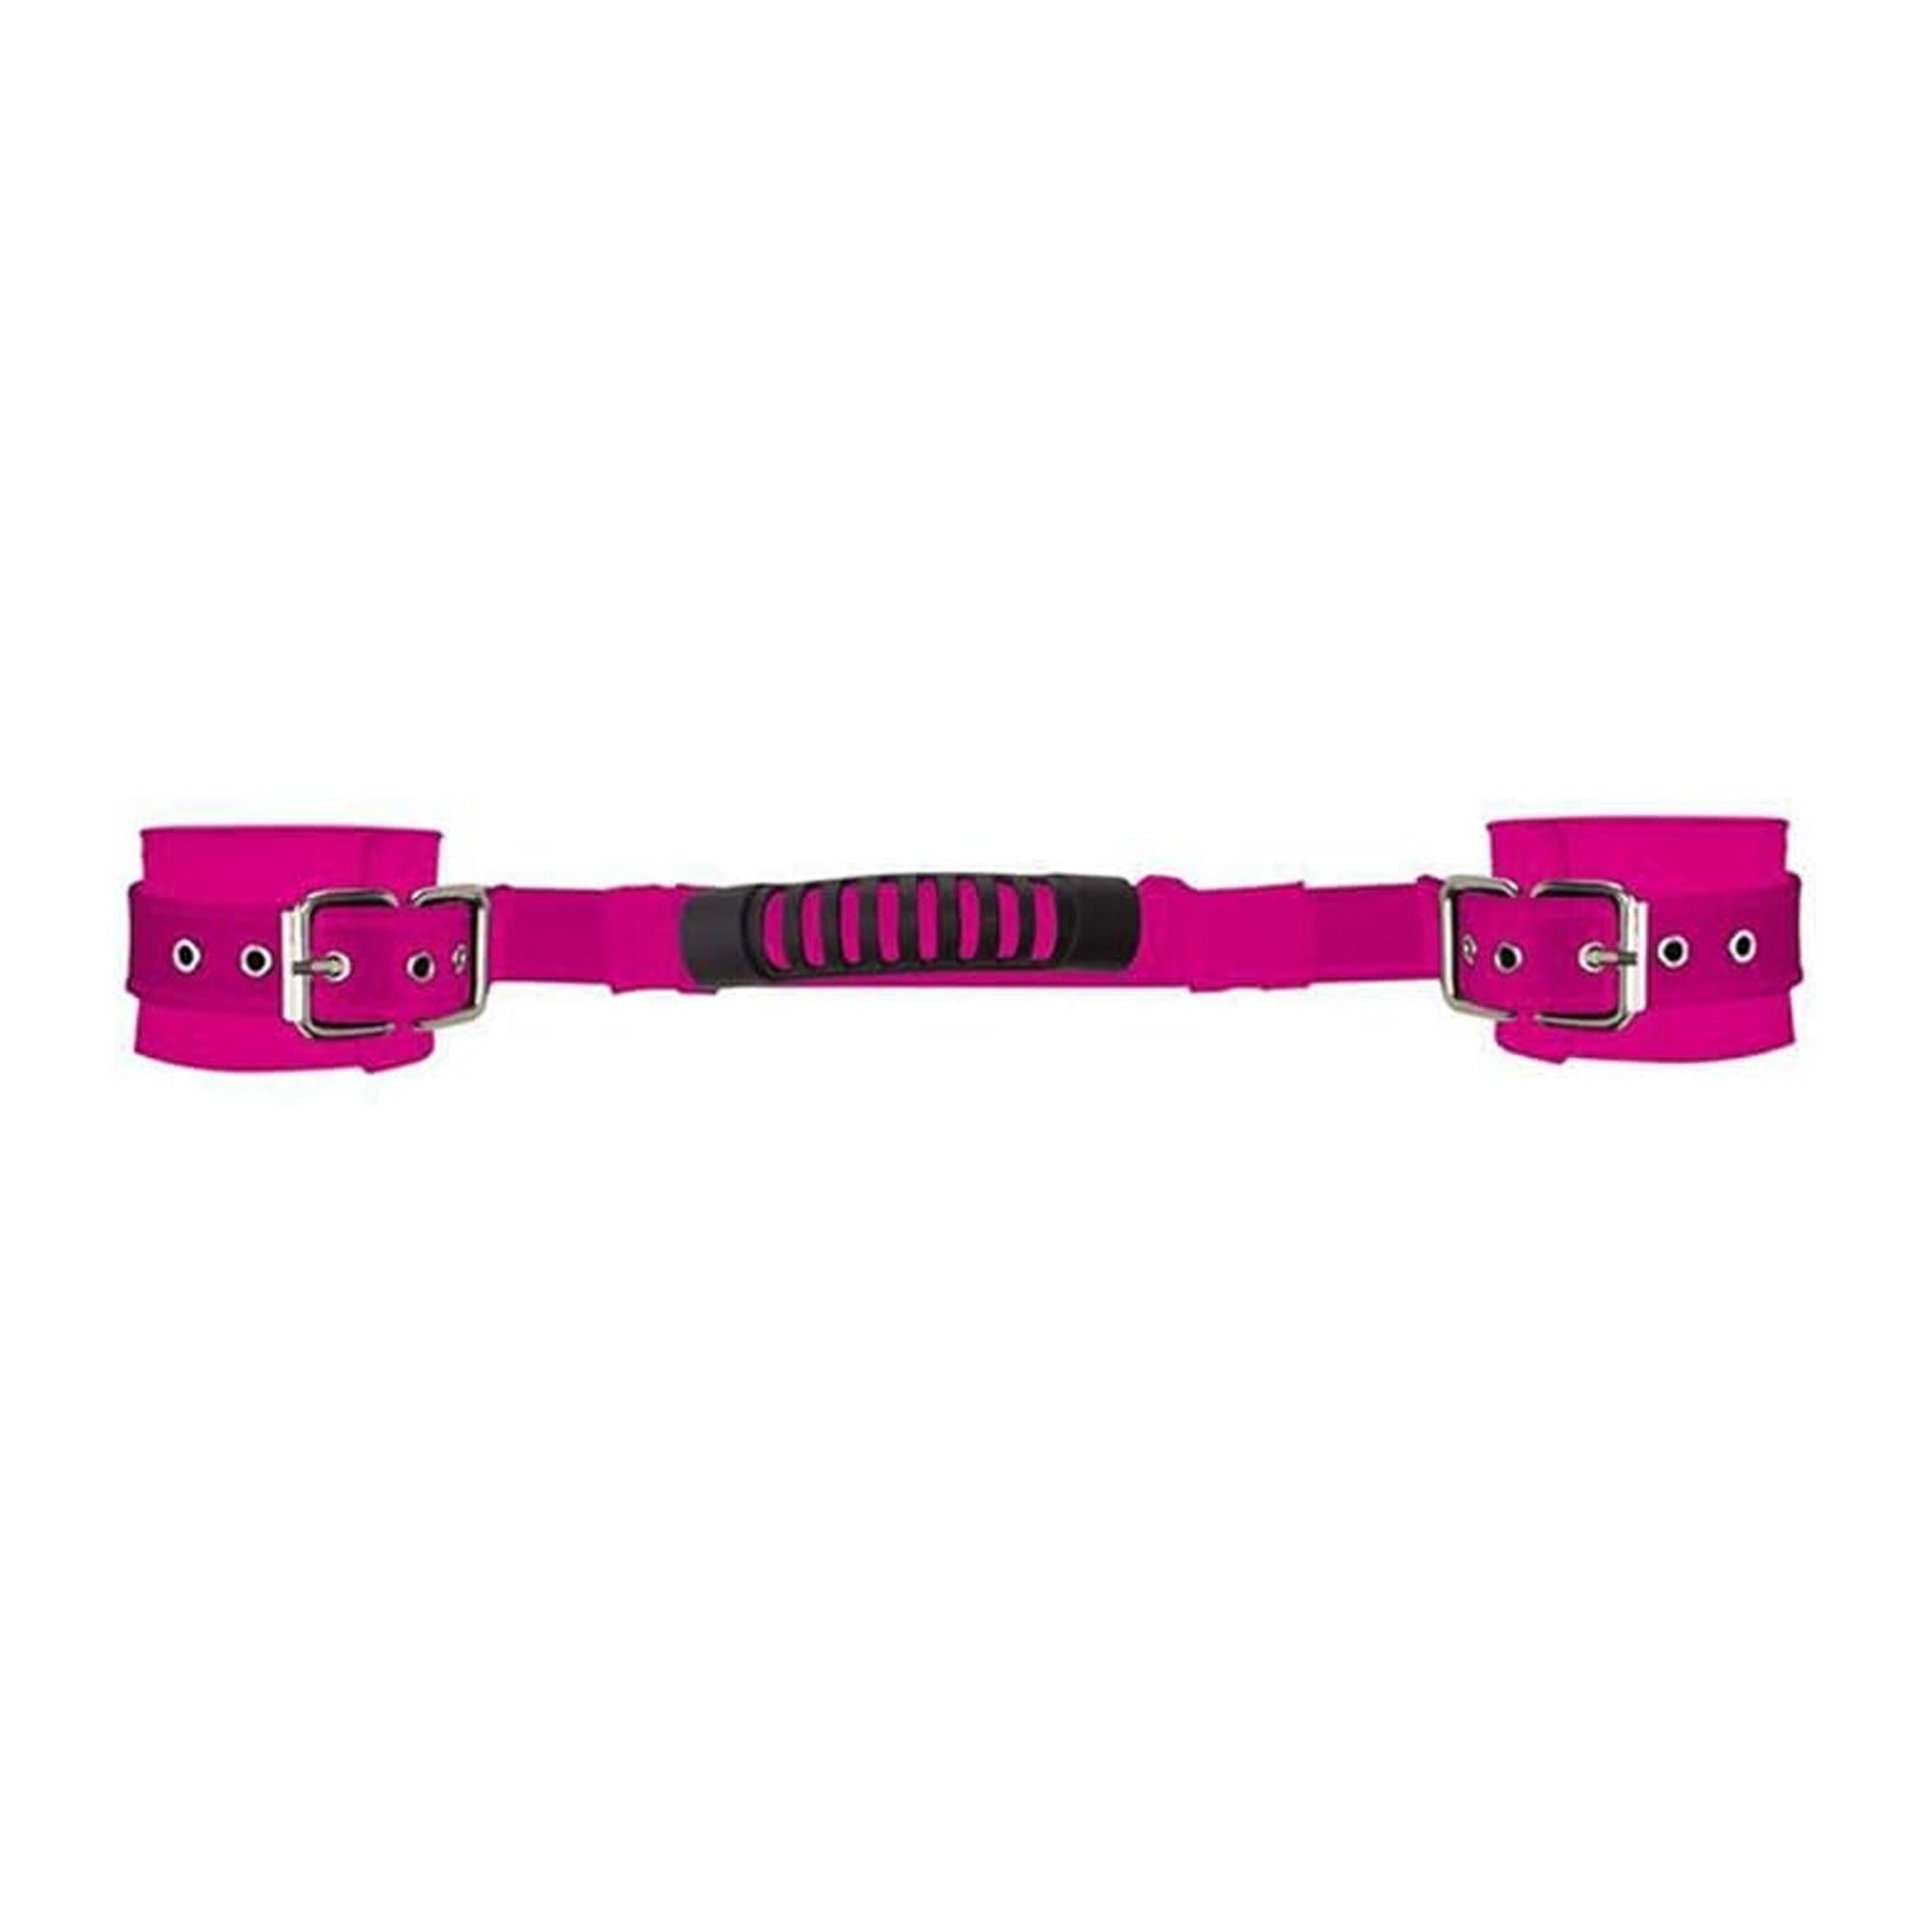 Shots Ouch Adjustable Leather Handcuffs - Pink